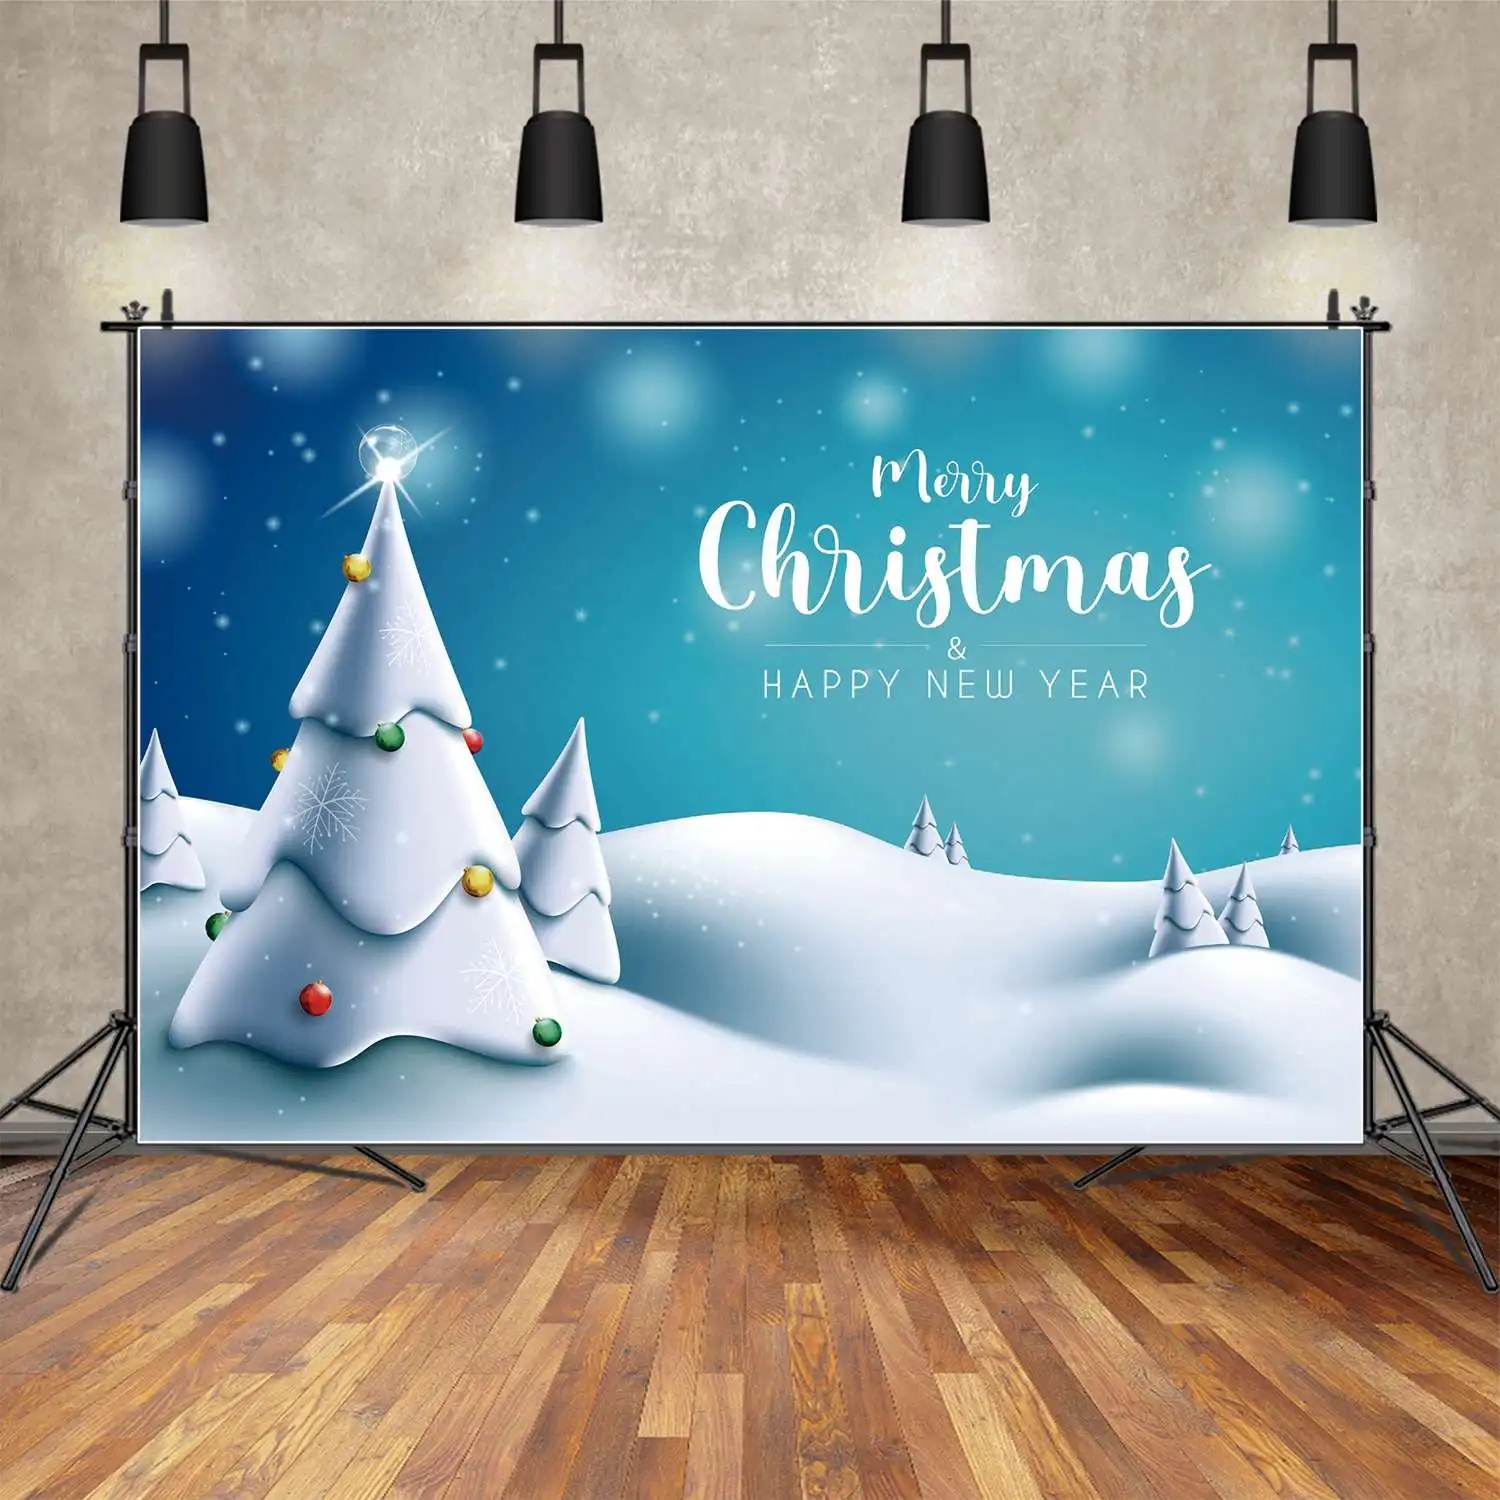 

MOON.QG Backdrop Merry Christmas Banner Snow Tree White Hill Ground Party Background Children's Snowflake Sky Party Photo Booth